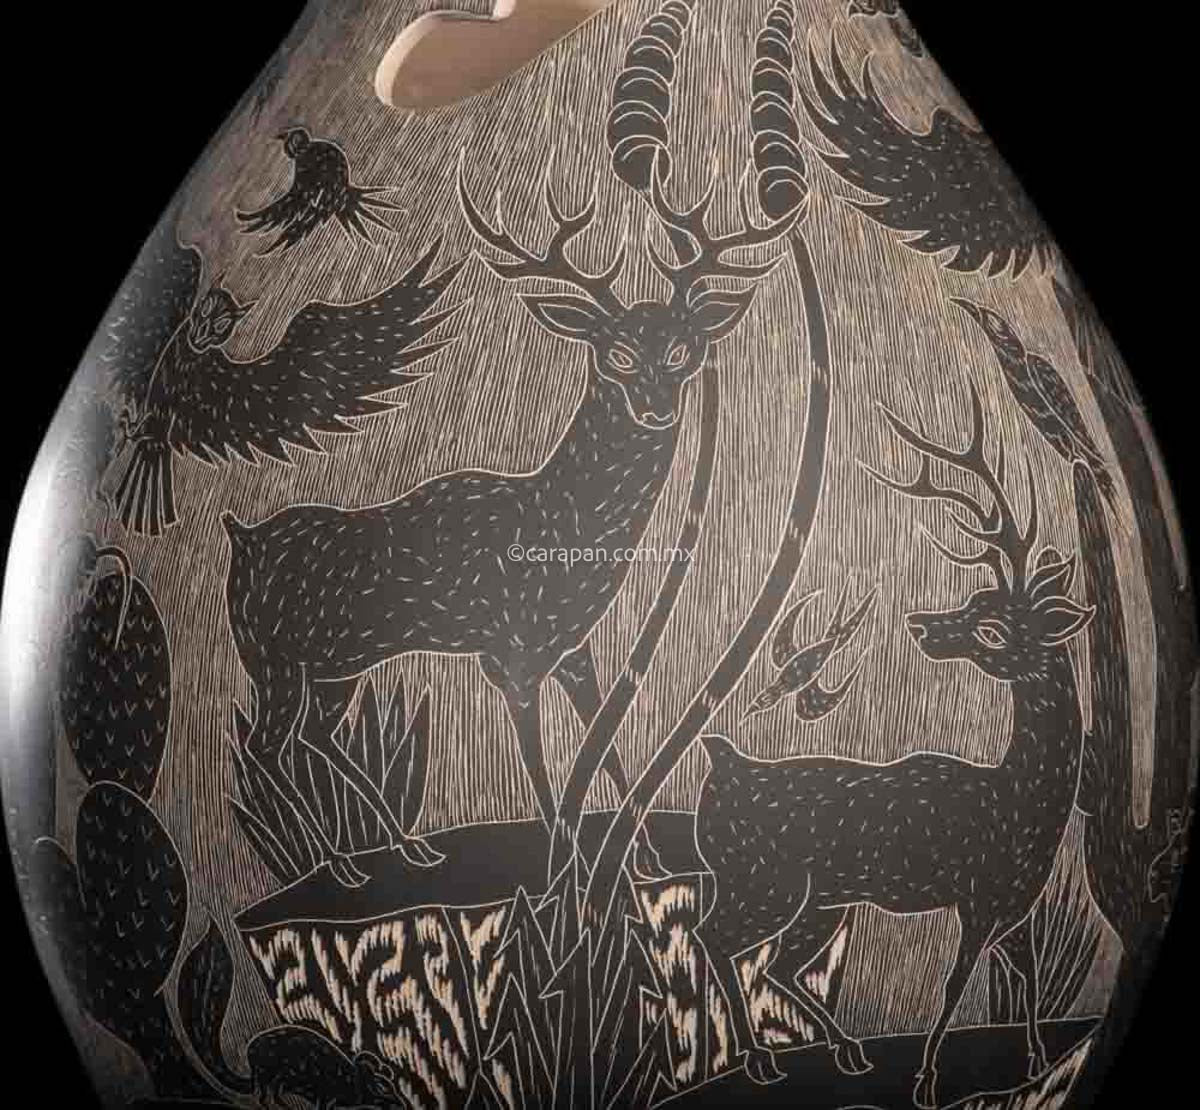 Mata Ortiz Pot With Etched Animals in Black Over Beige